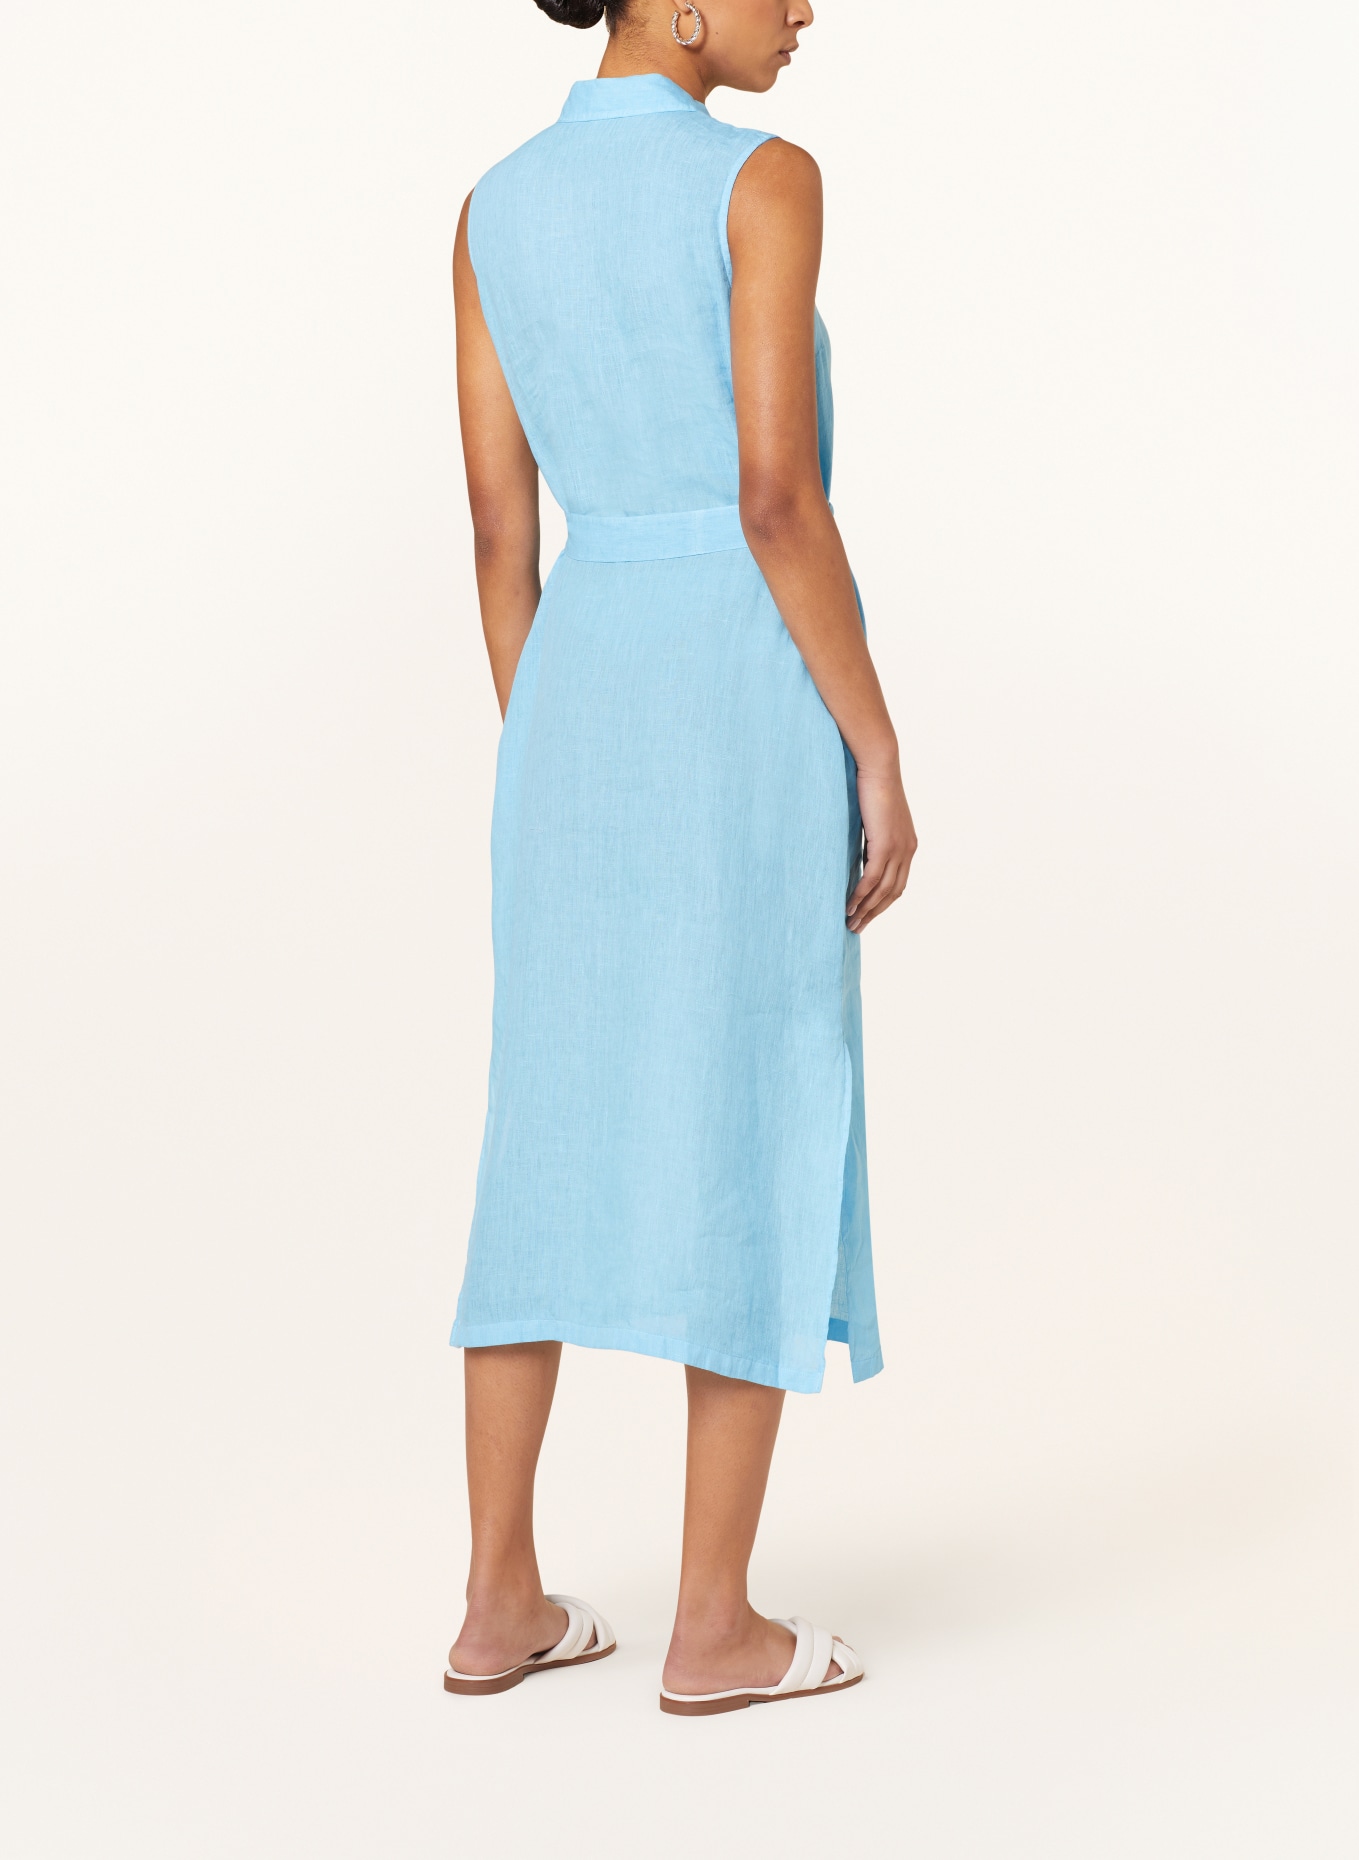 120%lino Beach dress made of linen, Color: TURQUOISE (Image 3)